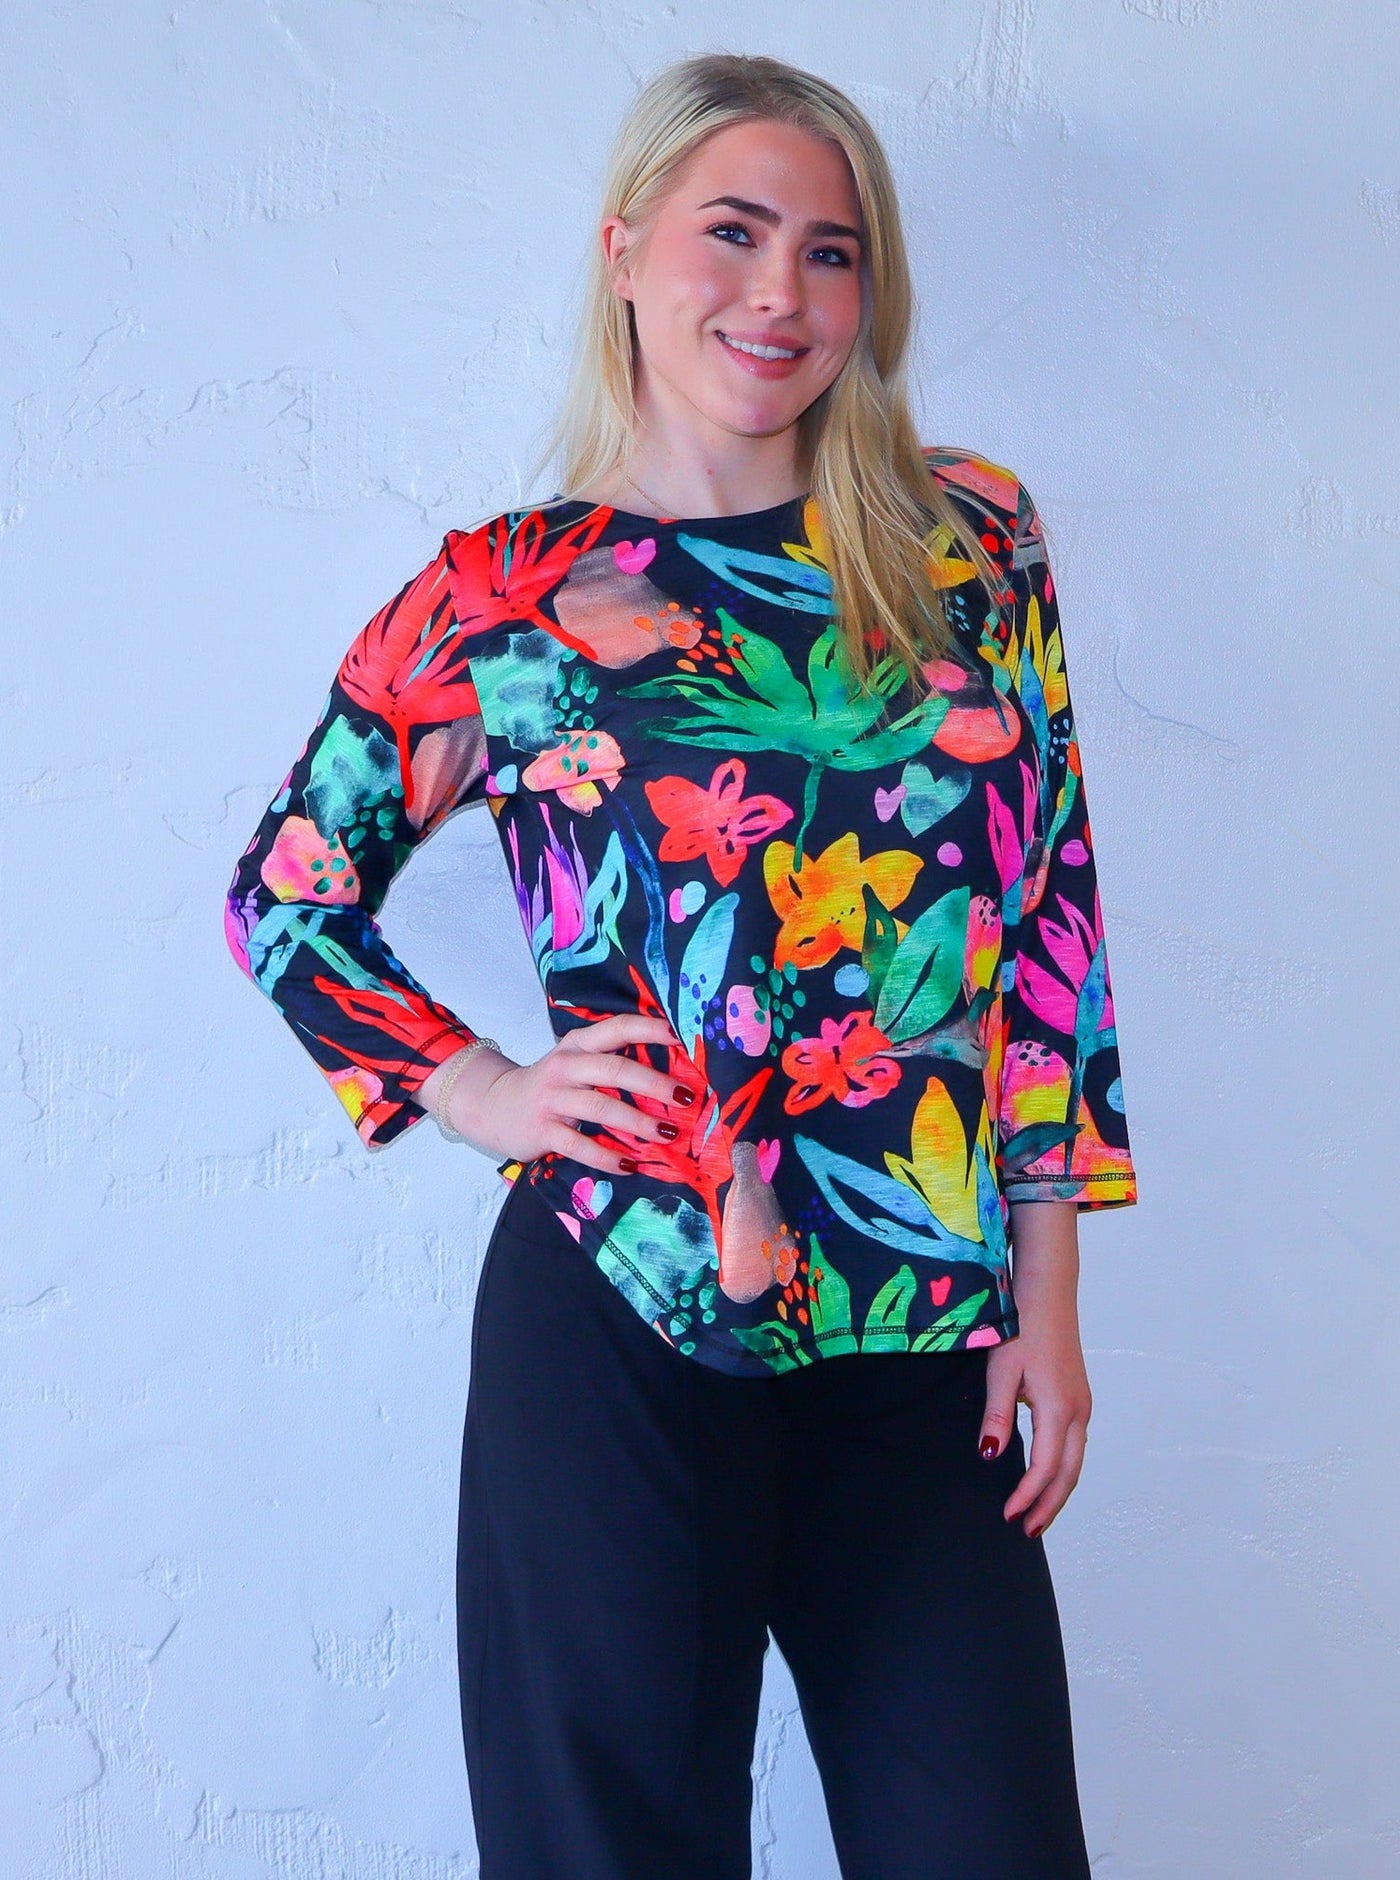 Model is wearing a three quarter sleeve multi colored neon and black floral printed shirt paired with high waisted black joggers.  